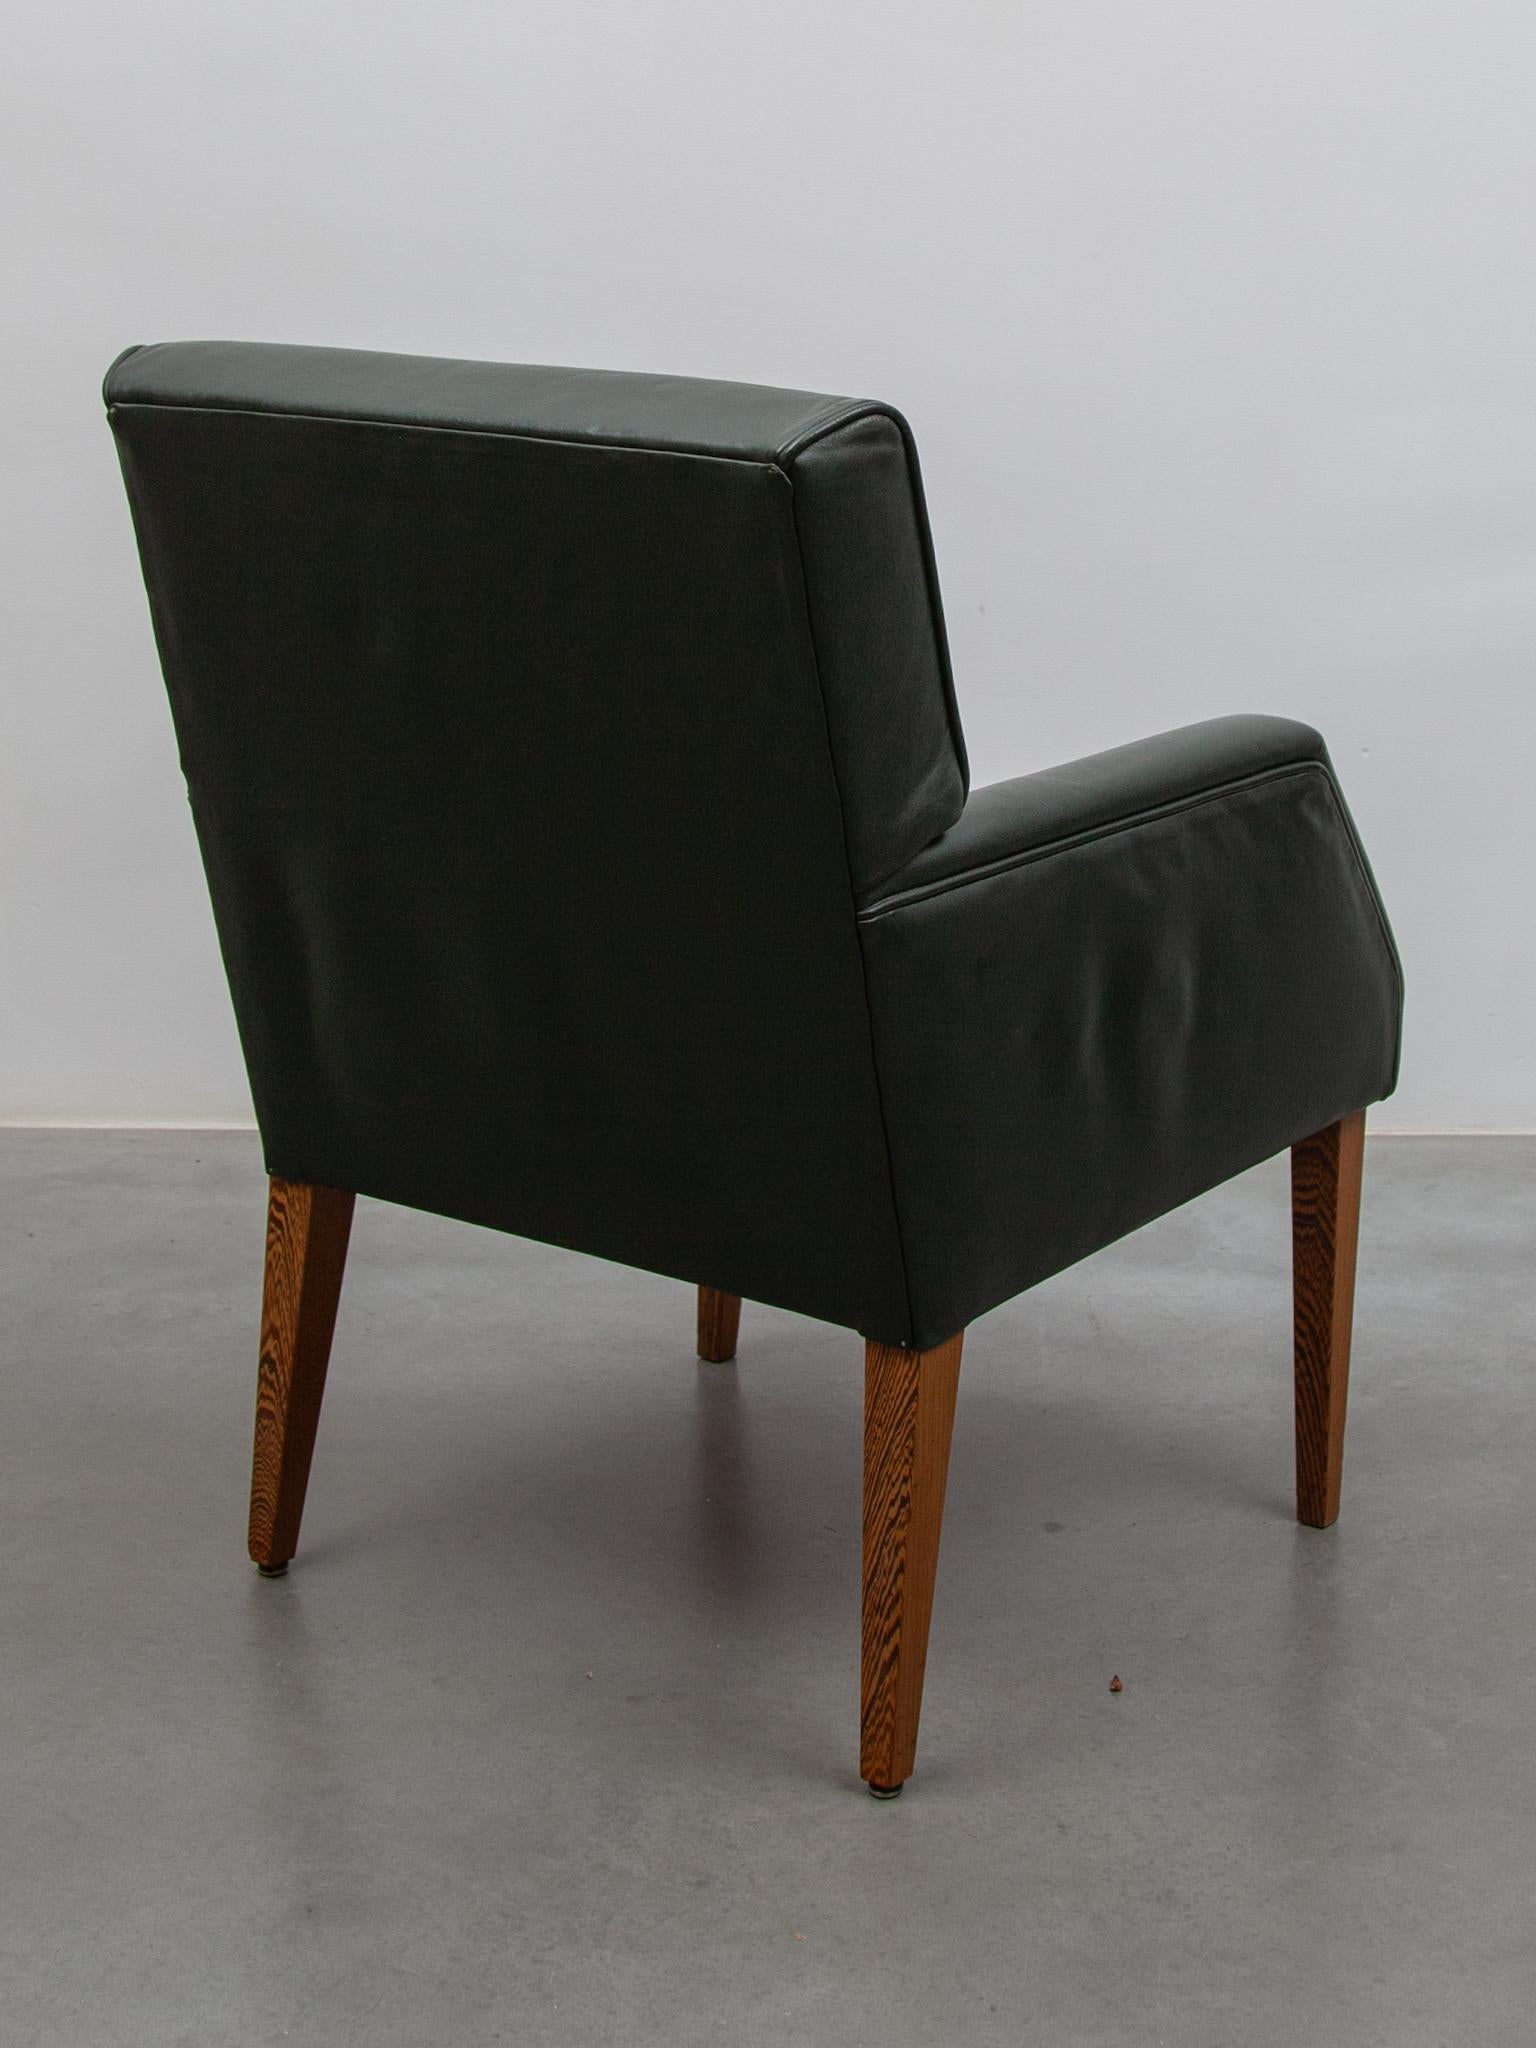 Set of Four Green Leather Arm Lounge Chairs, Denmark For Sale 1